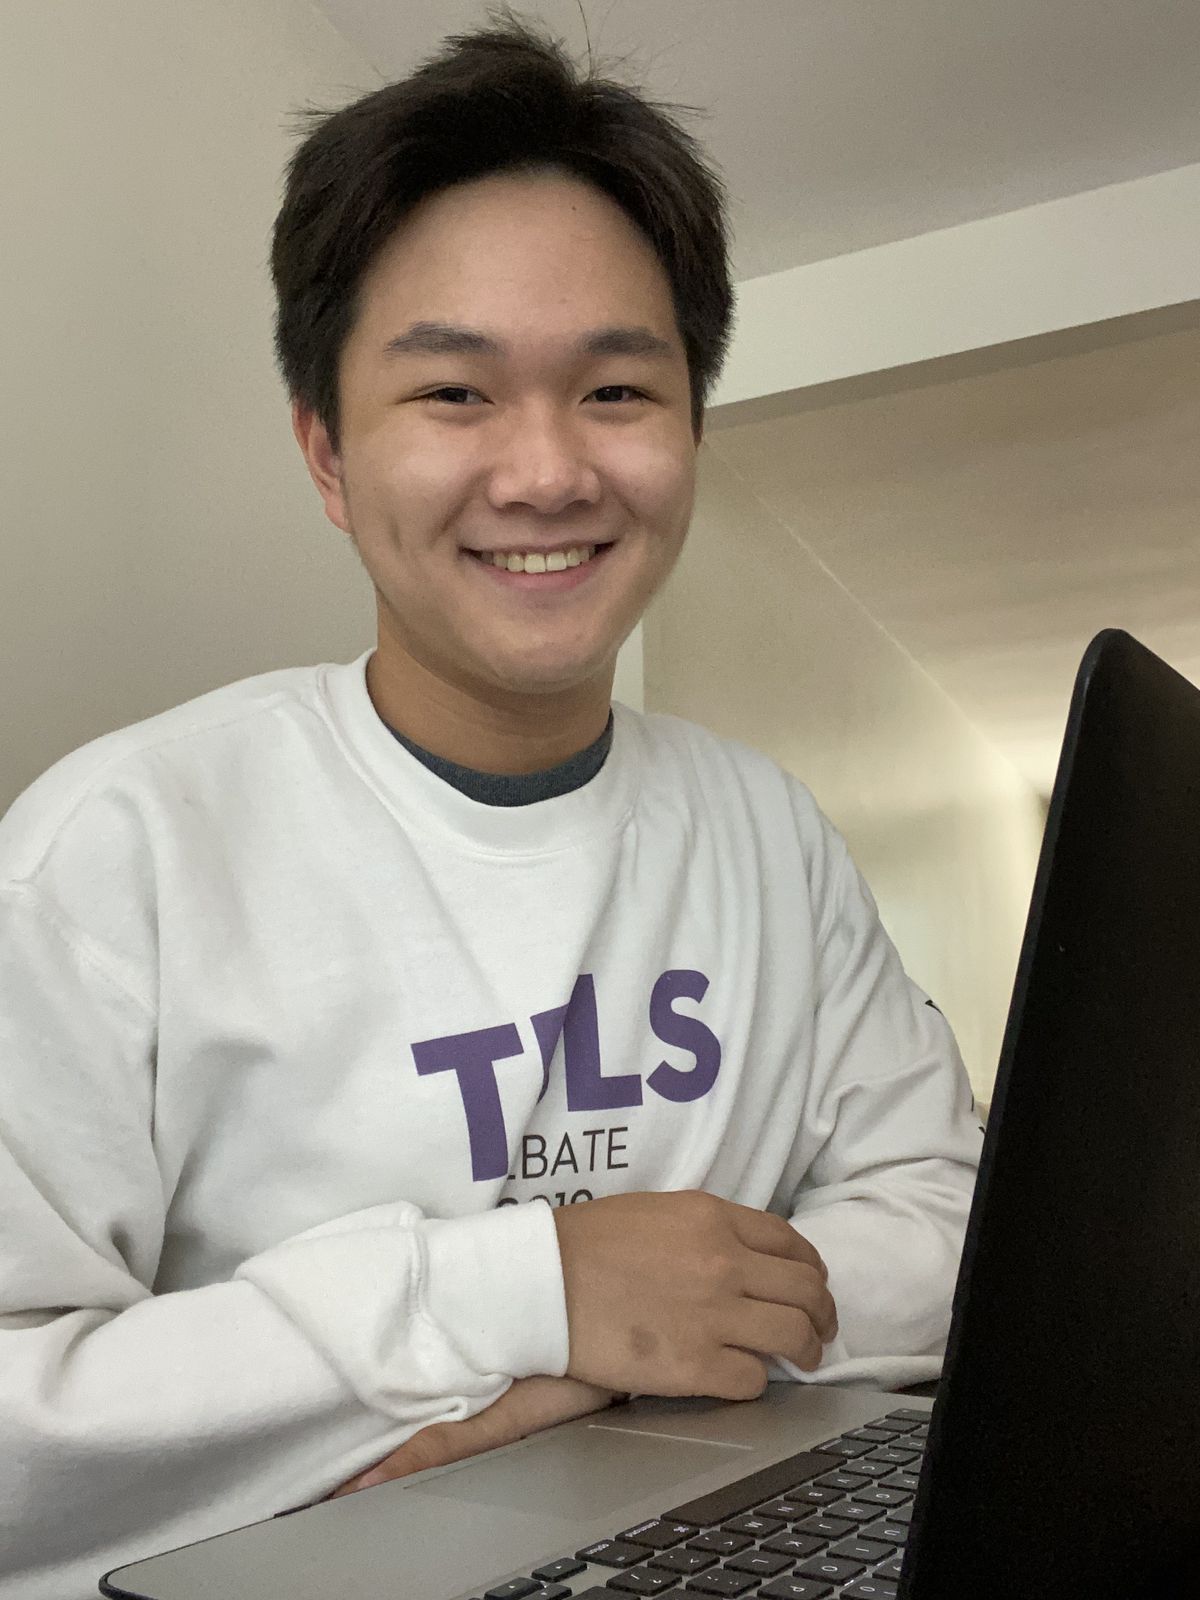 A student wearing a white sweater smiles as he sits at his computer.